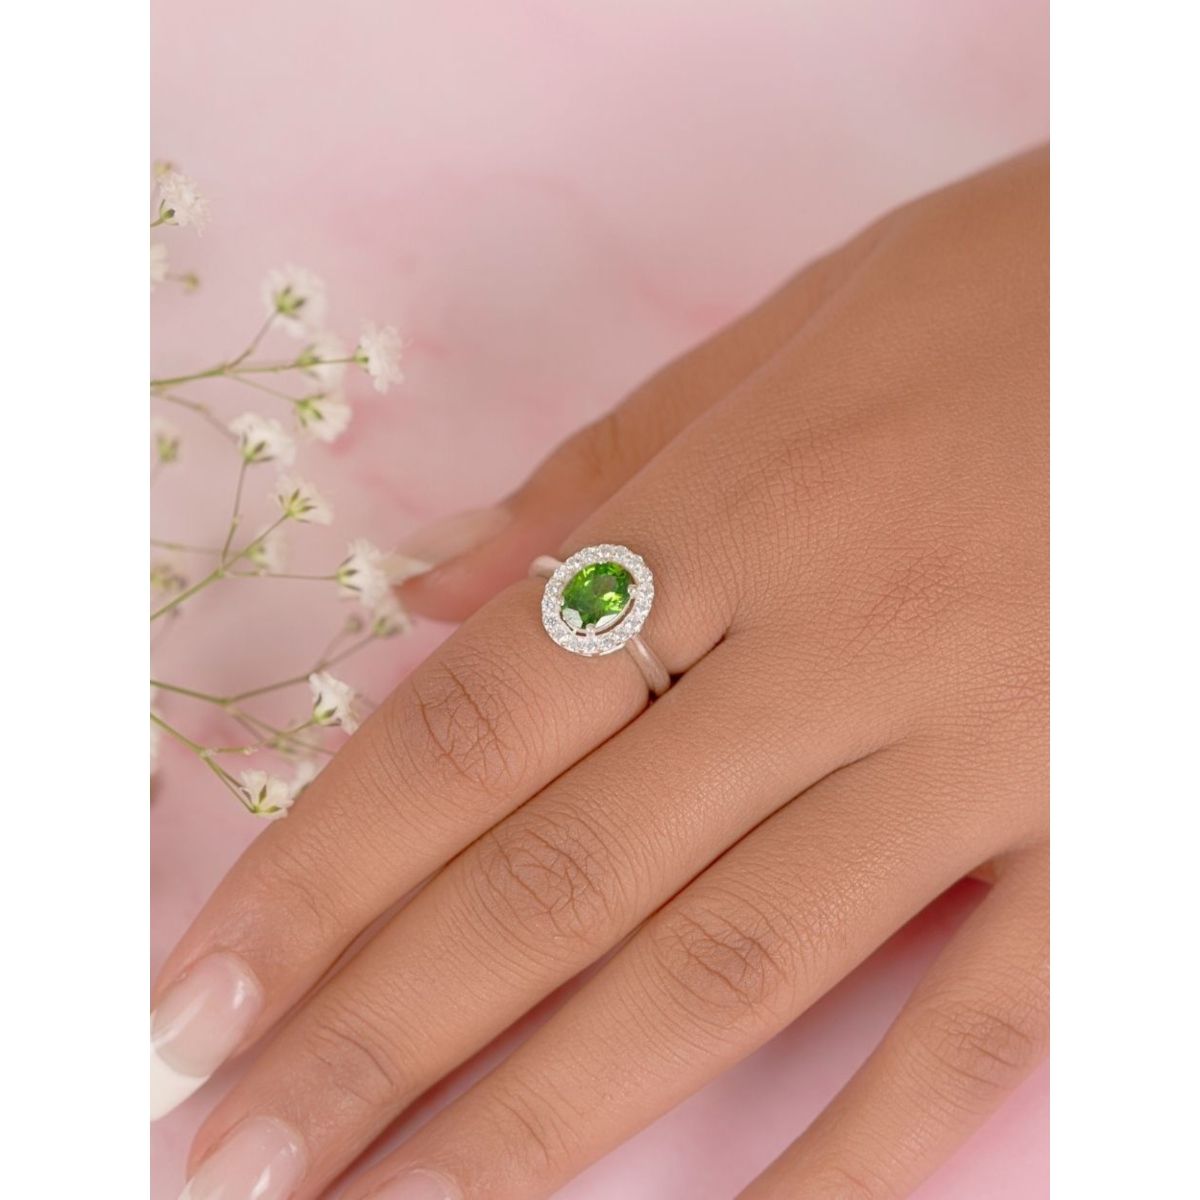 Carrie Elizabeth Jewellery - Oh hello....look who's back in town...our  stunning fern green topaz deco ring is back in stock💚💚💚! This absolute  beauty sold out so quickly when it launched so make